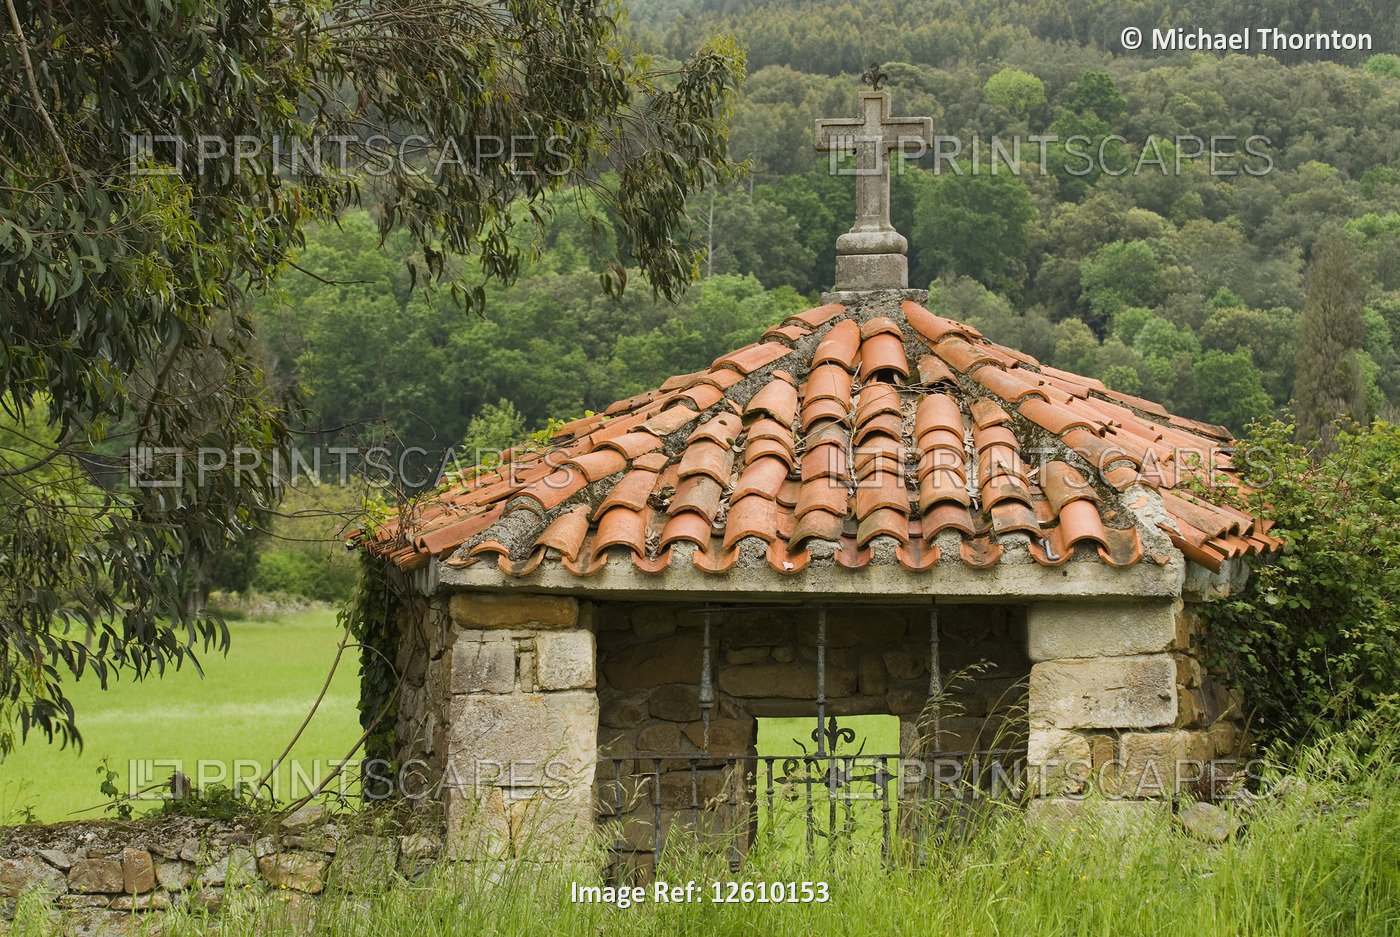 Pantiled Roof Shrine with Stone Cross in Rioseco, Northern Spain.